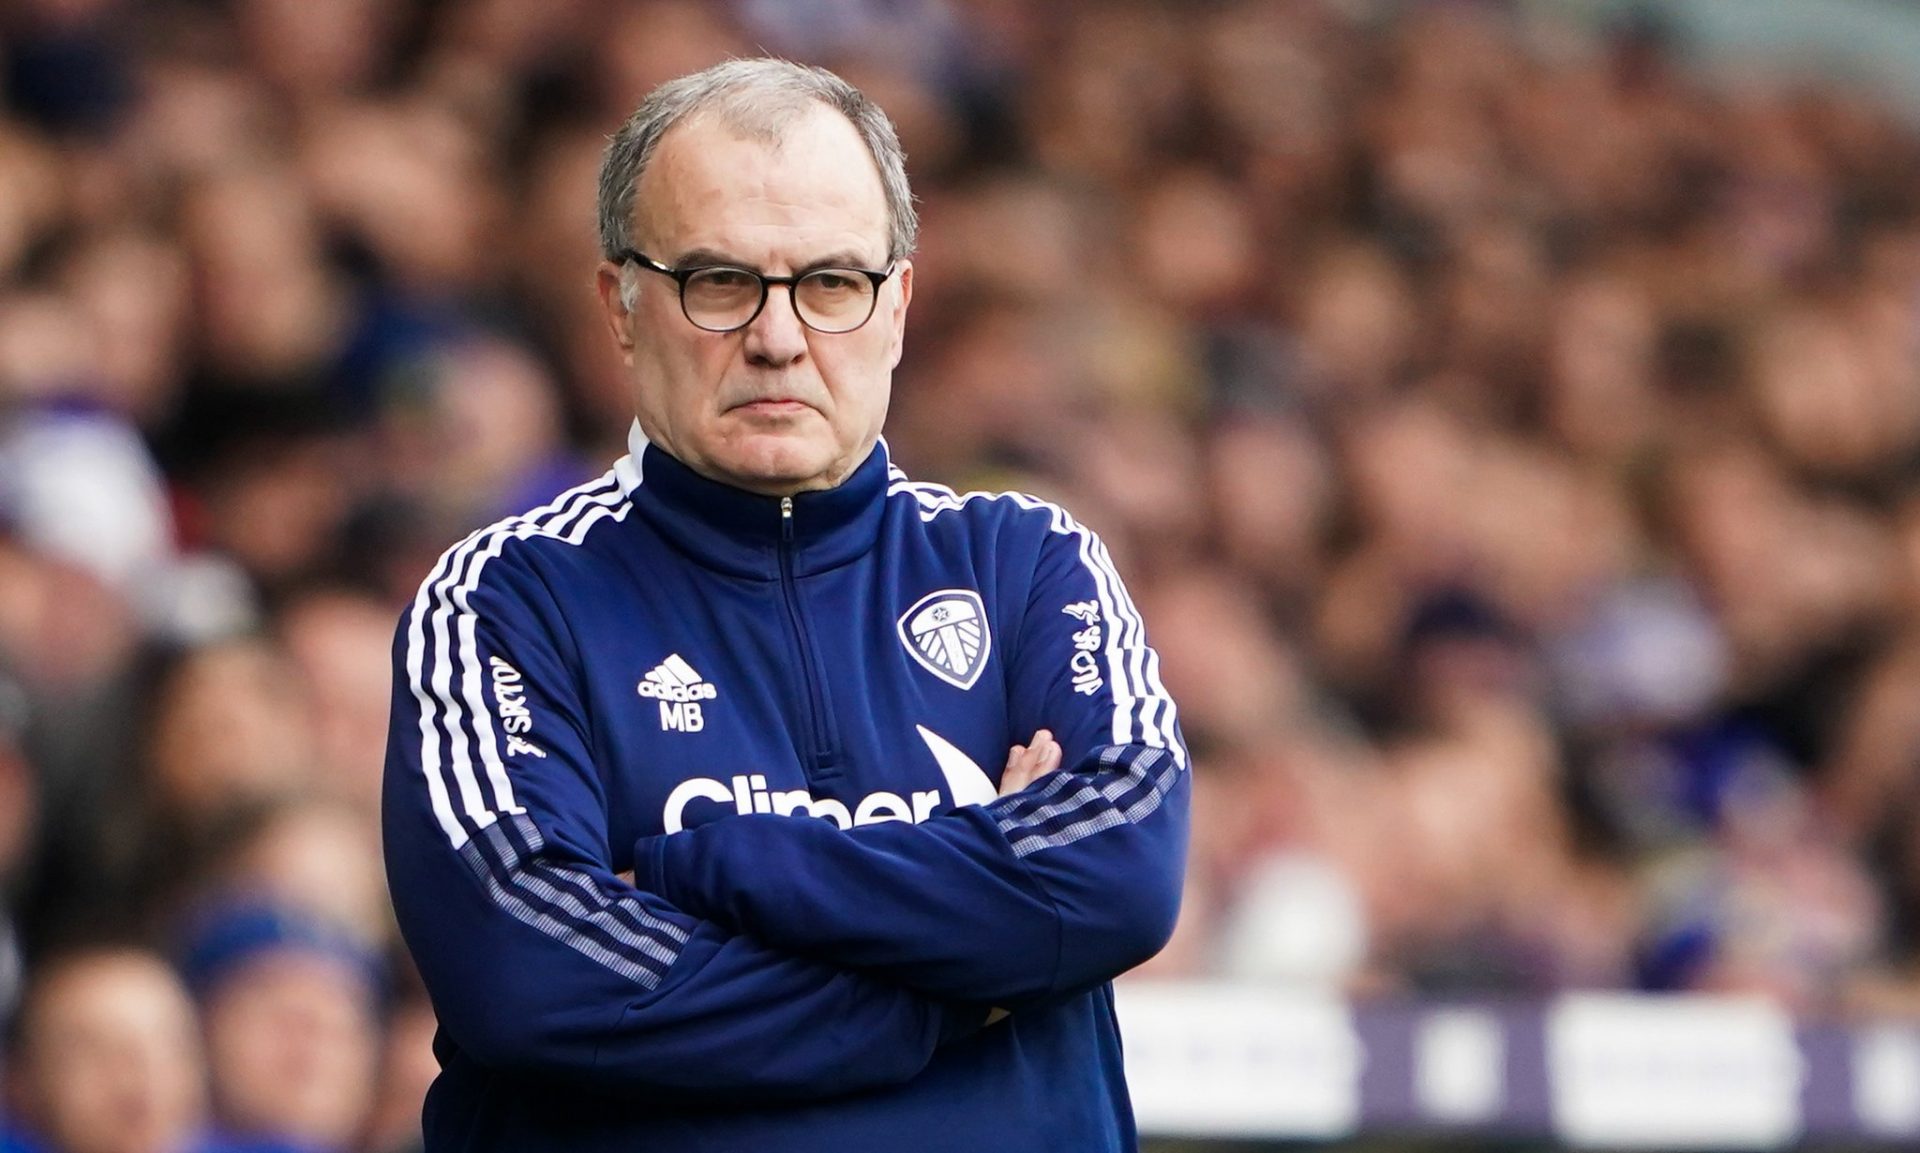 Bournemouth eye Marcelo Bielsa as next manager with the former Leeds boss keen to return to the Premier League.